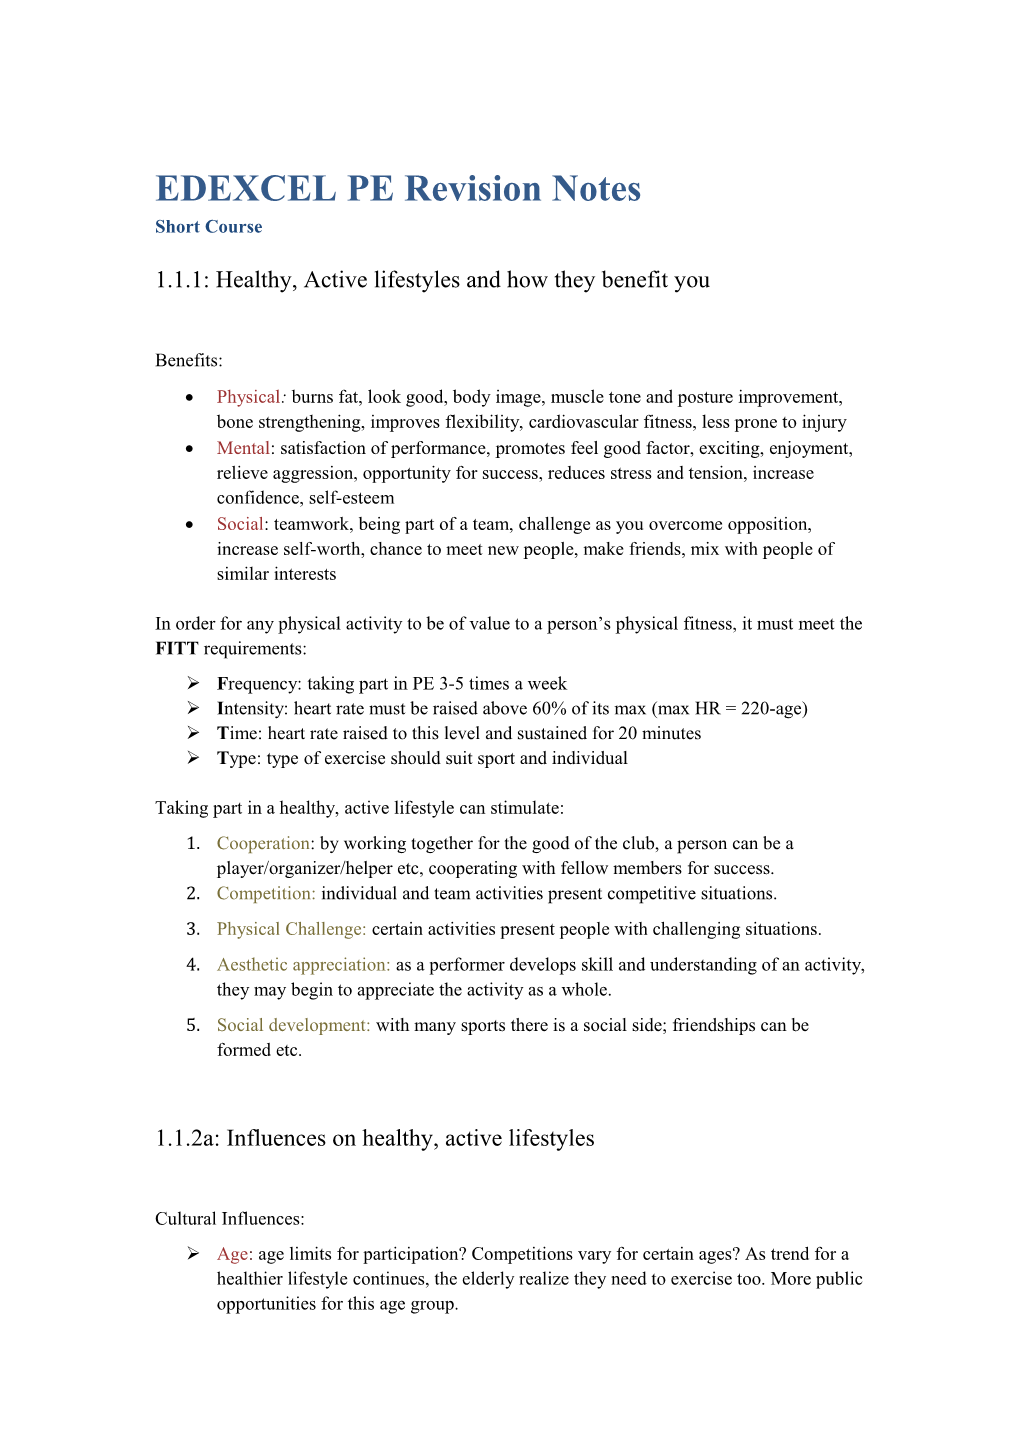 1.1.1: Healthy, Active Lifestyles and How They Benefit You